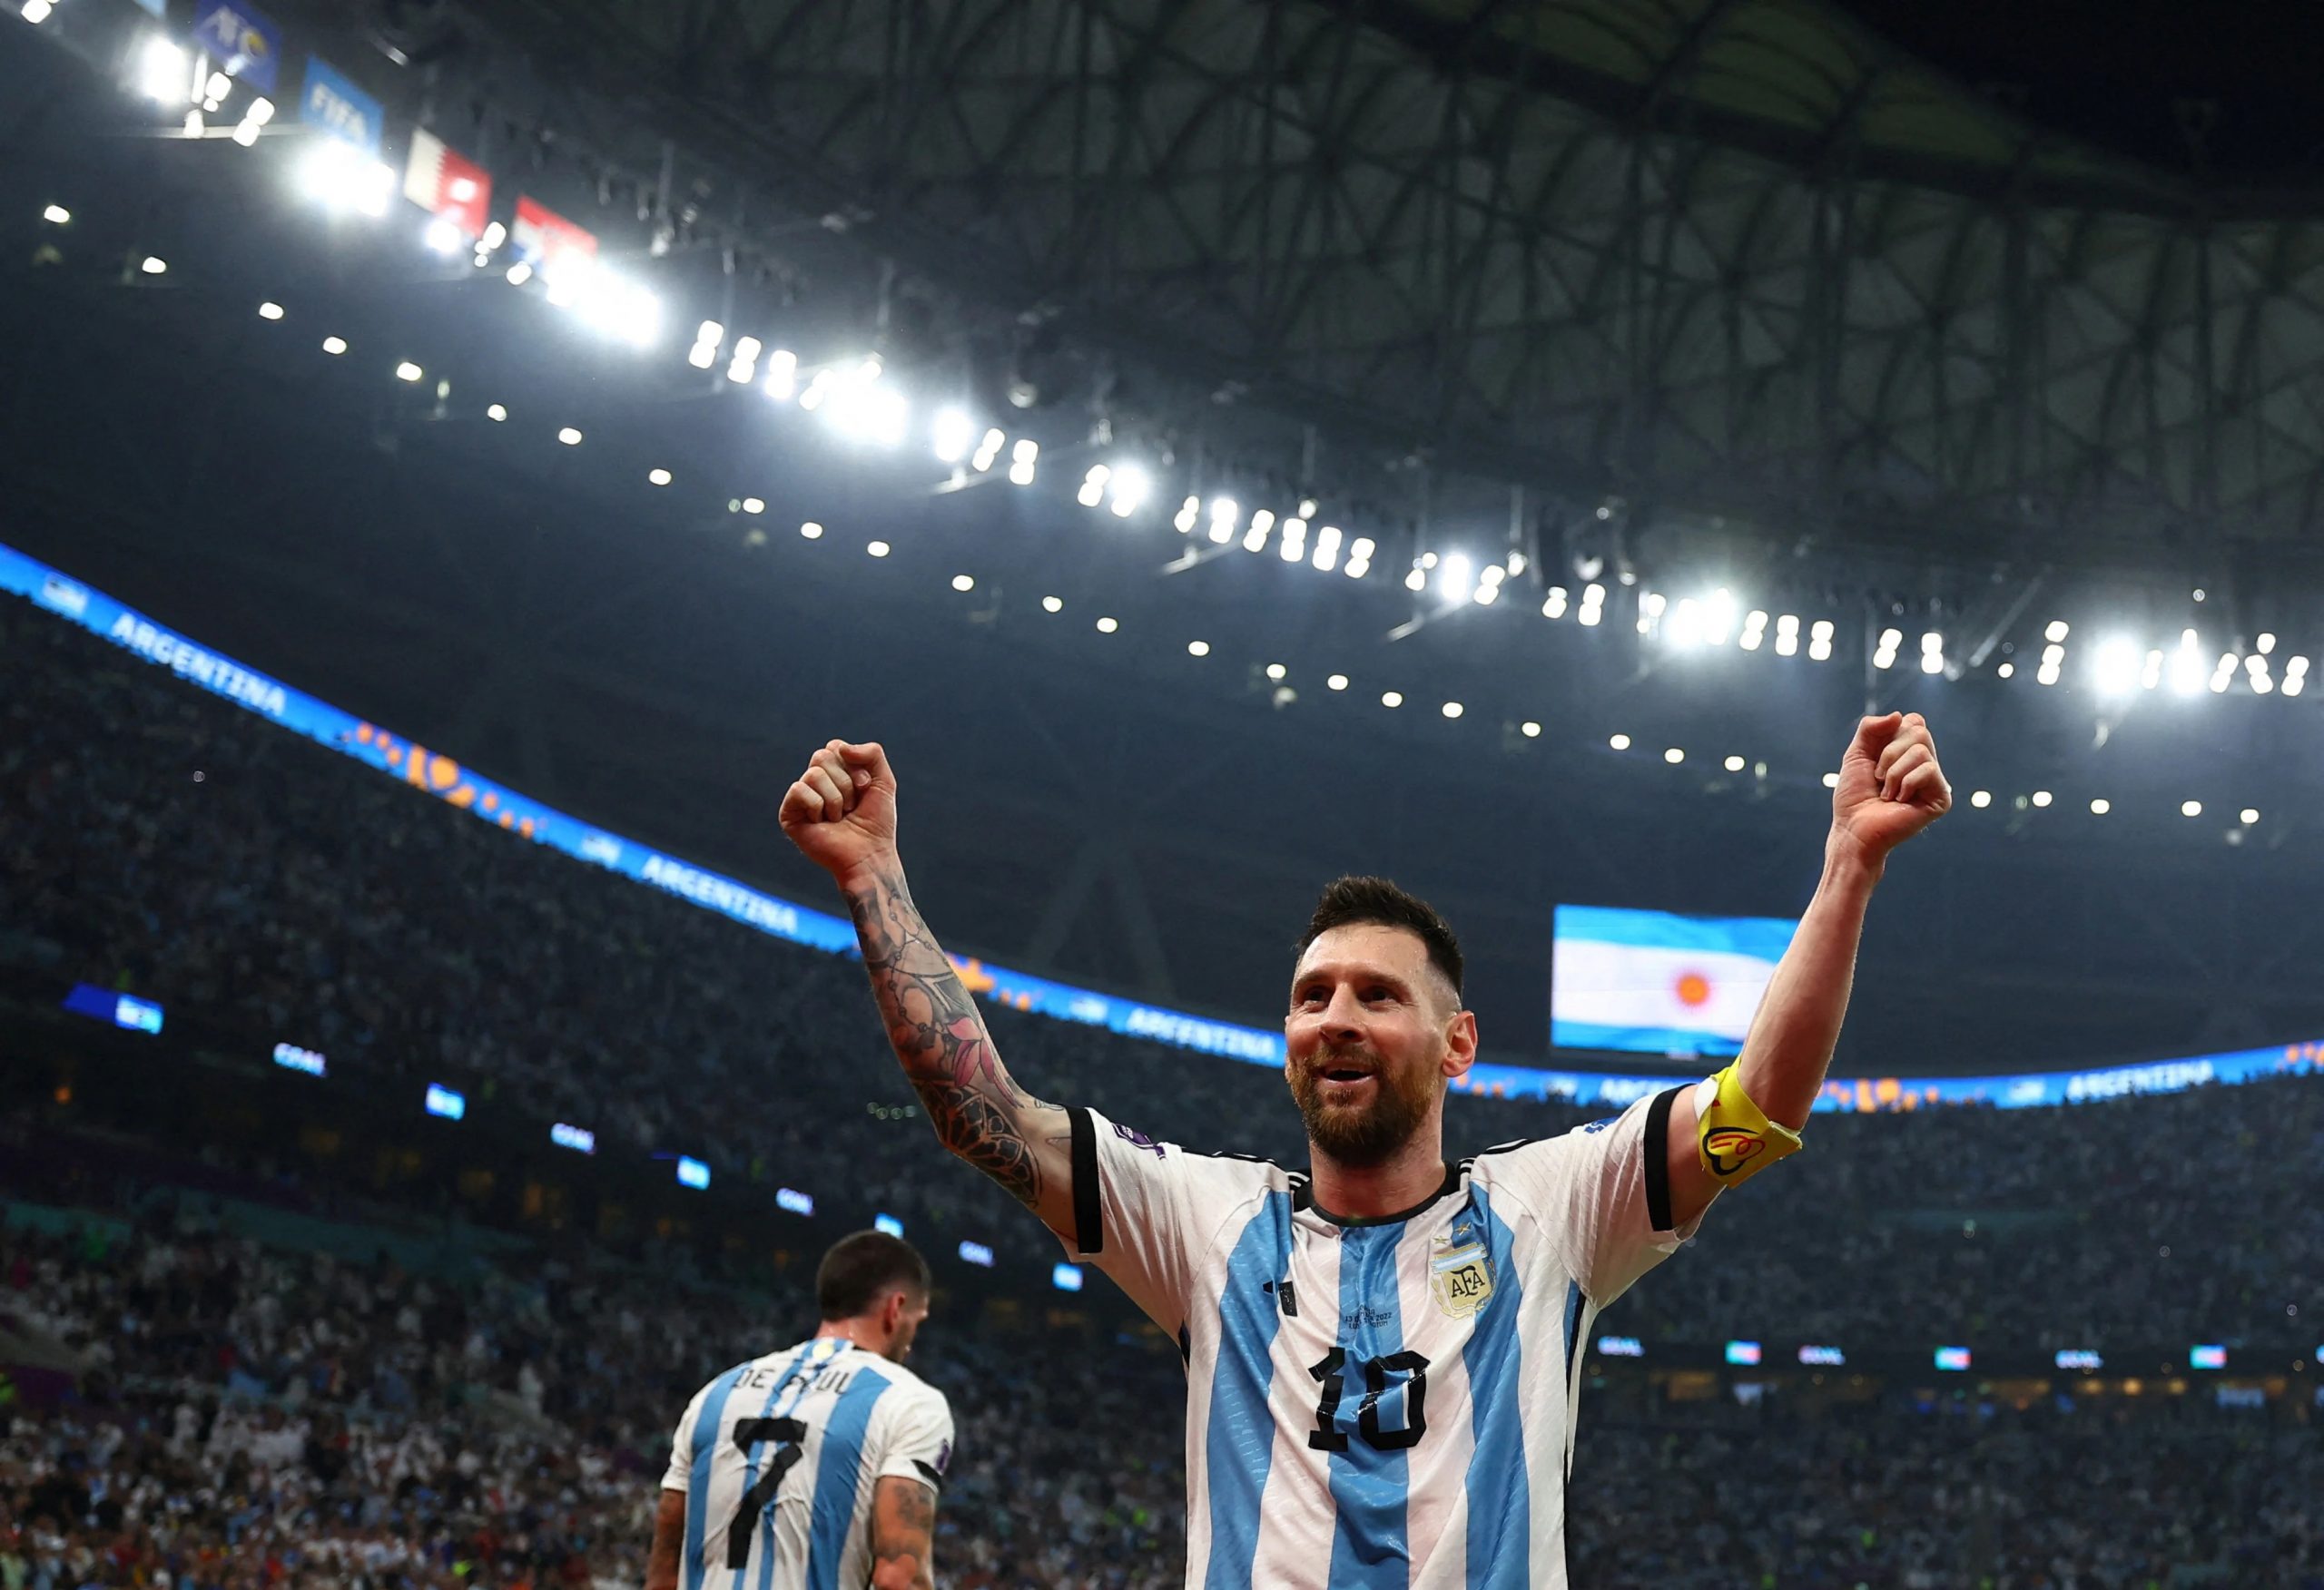 Messi Determined to Be at His Best in the Final